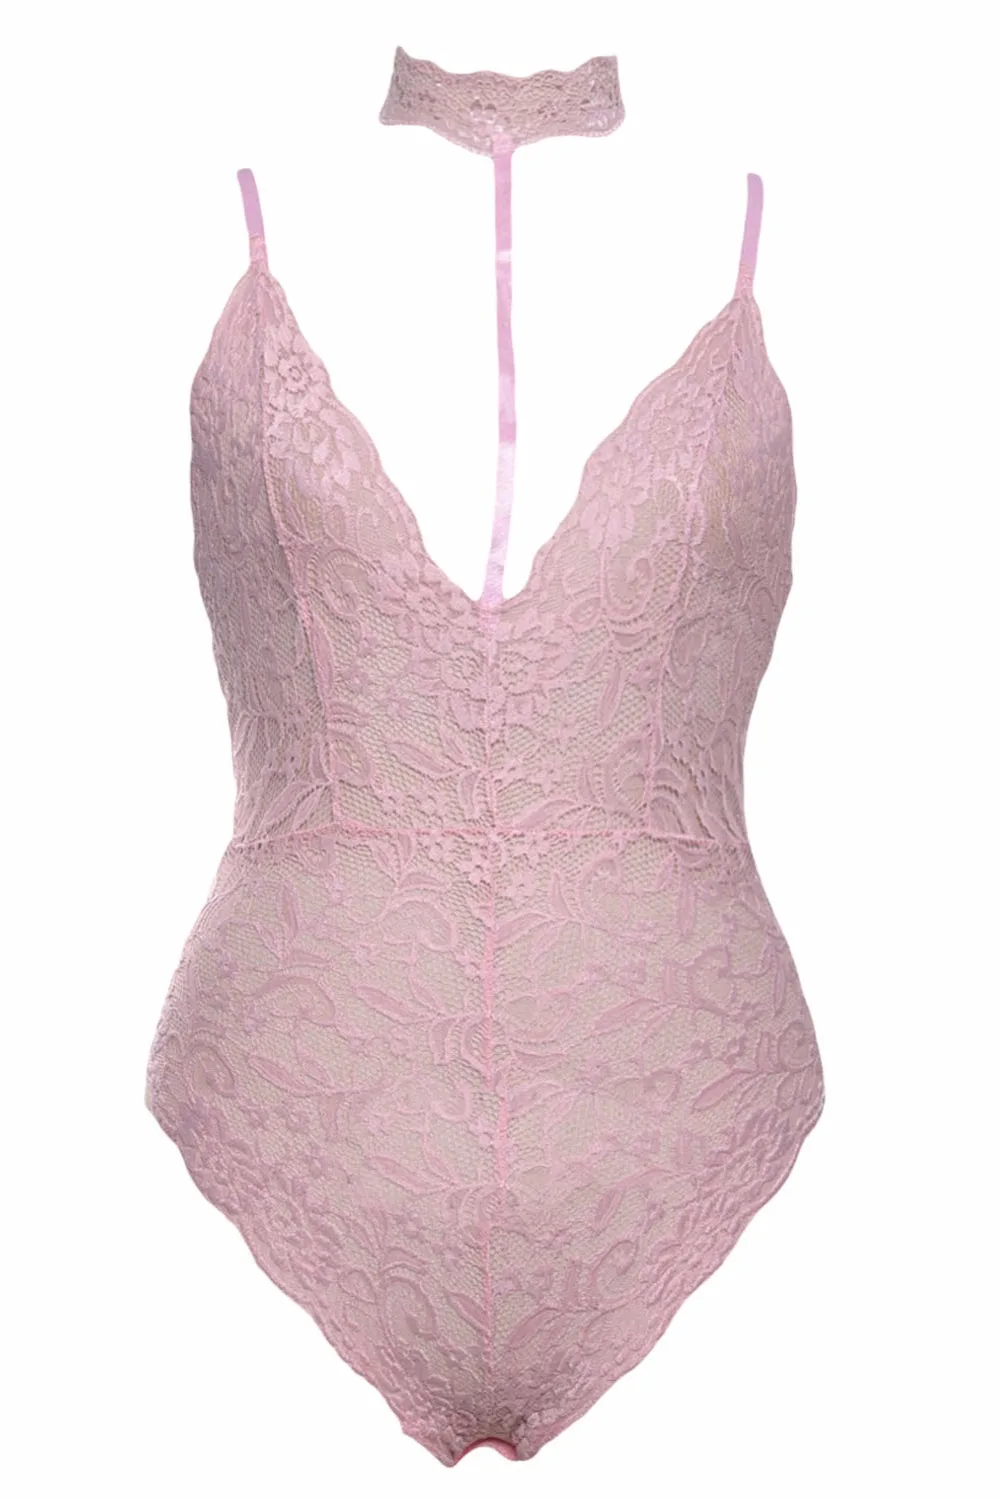 Pink-Sheer-Lace-Choker-Neck-Teddy-Lingerie-LC32139-10-2